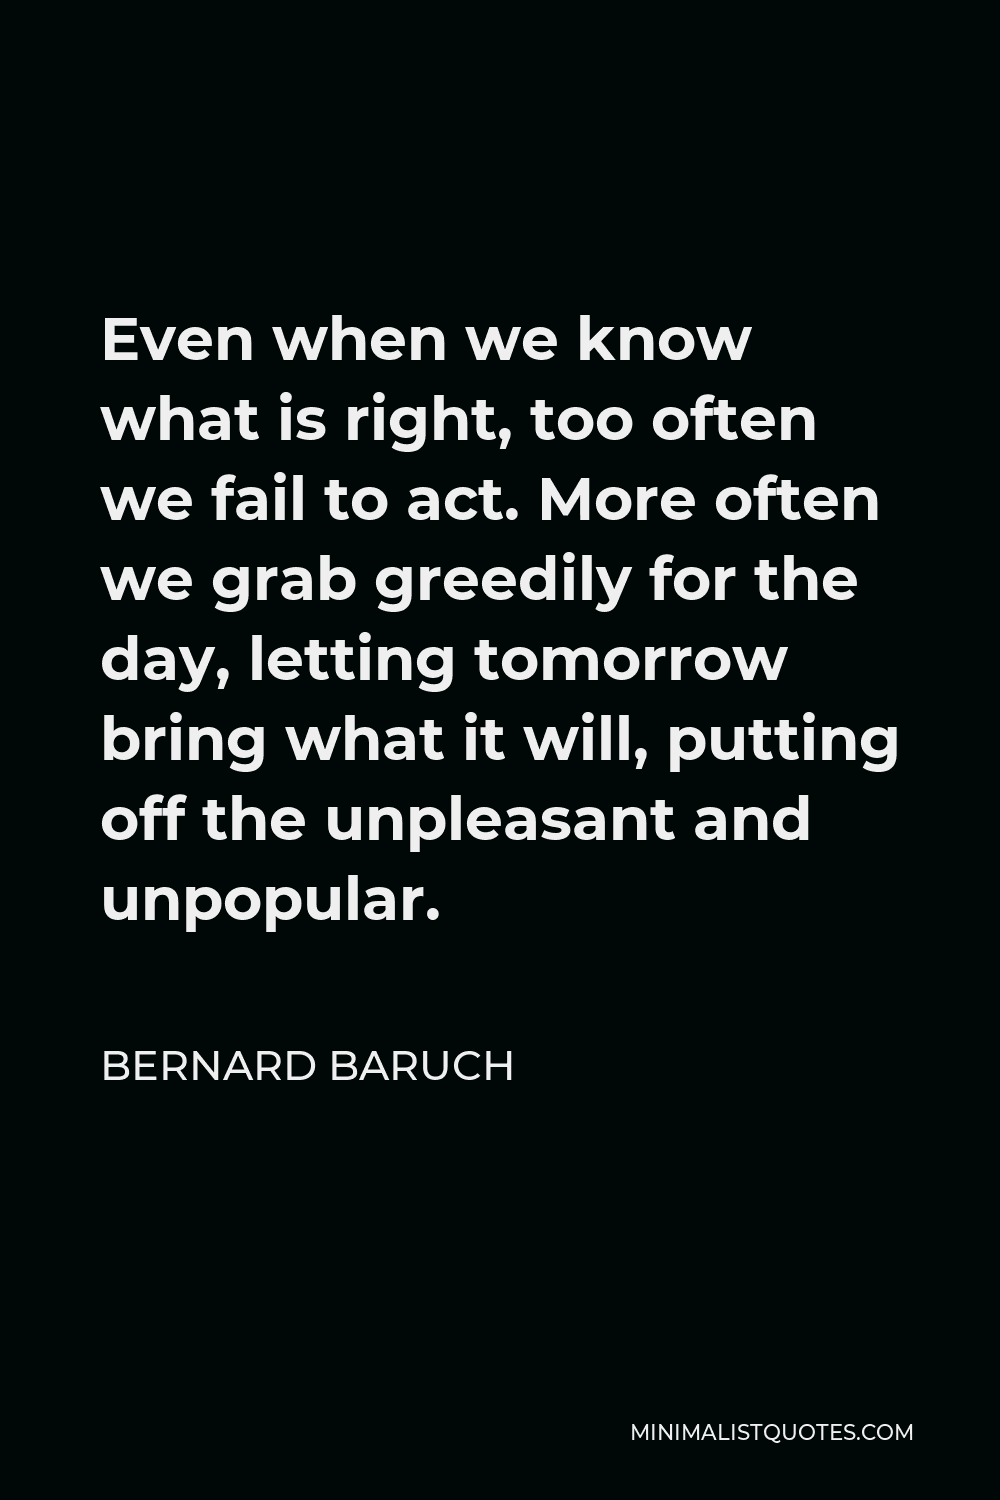 Bernard Baruch Quote - Even when we know what is right, too often we fail to act. More often we grab greedily for the day, letting tomorrow bring what it will, putting off the unpleasant and unpopular.